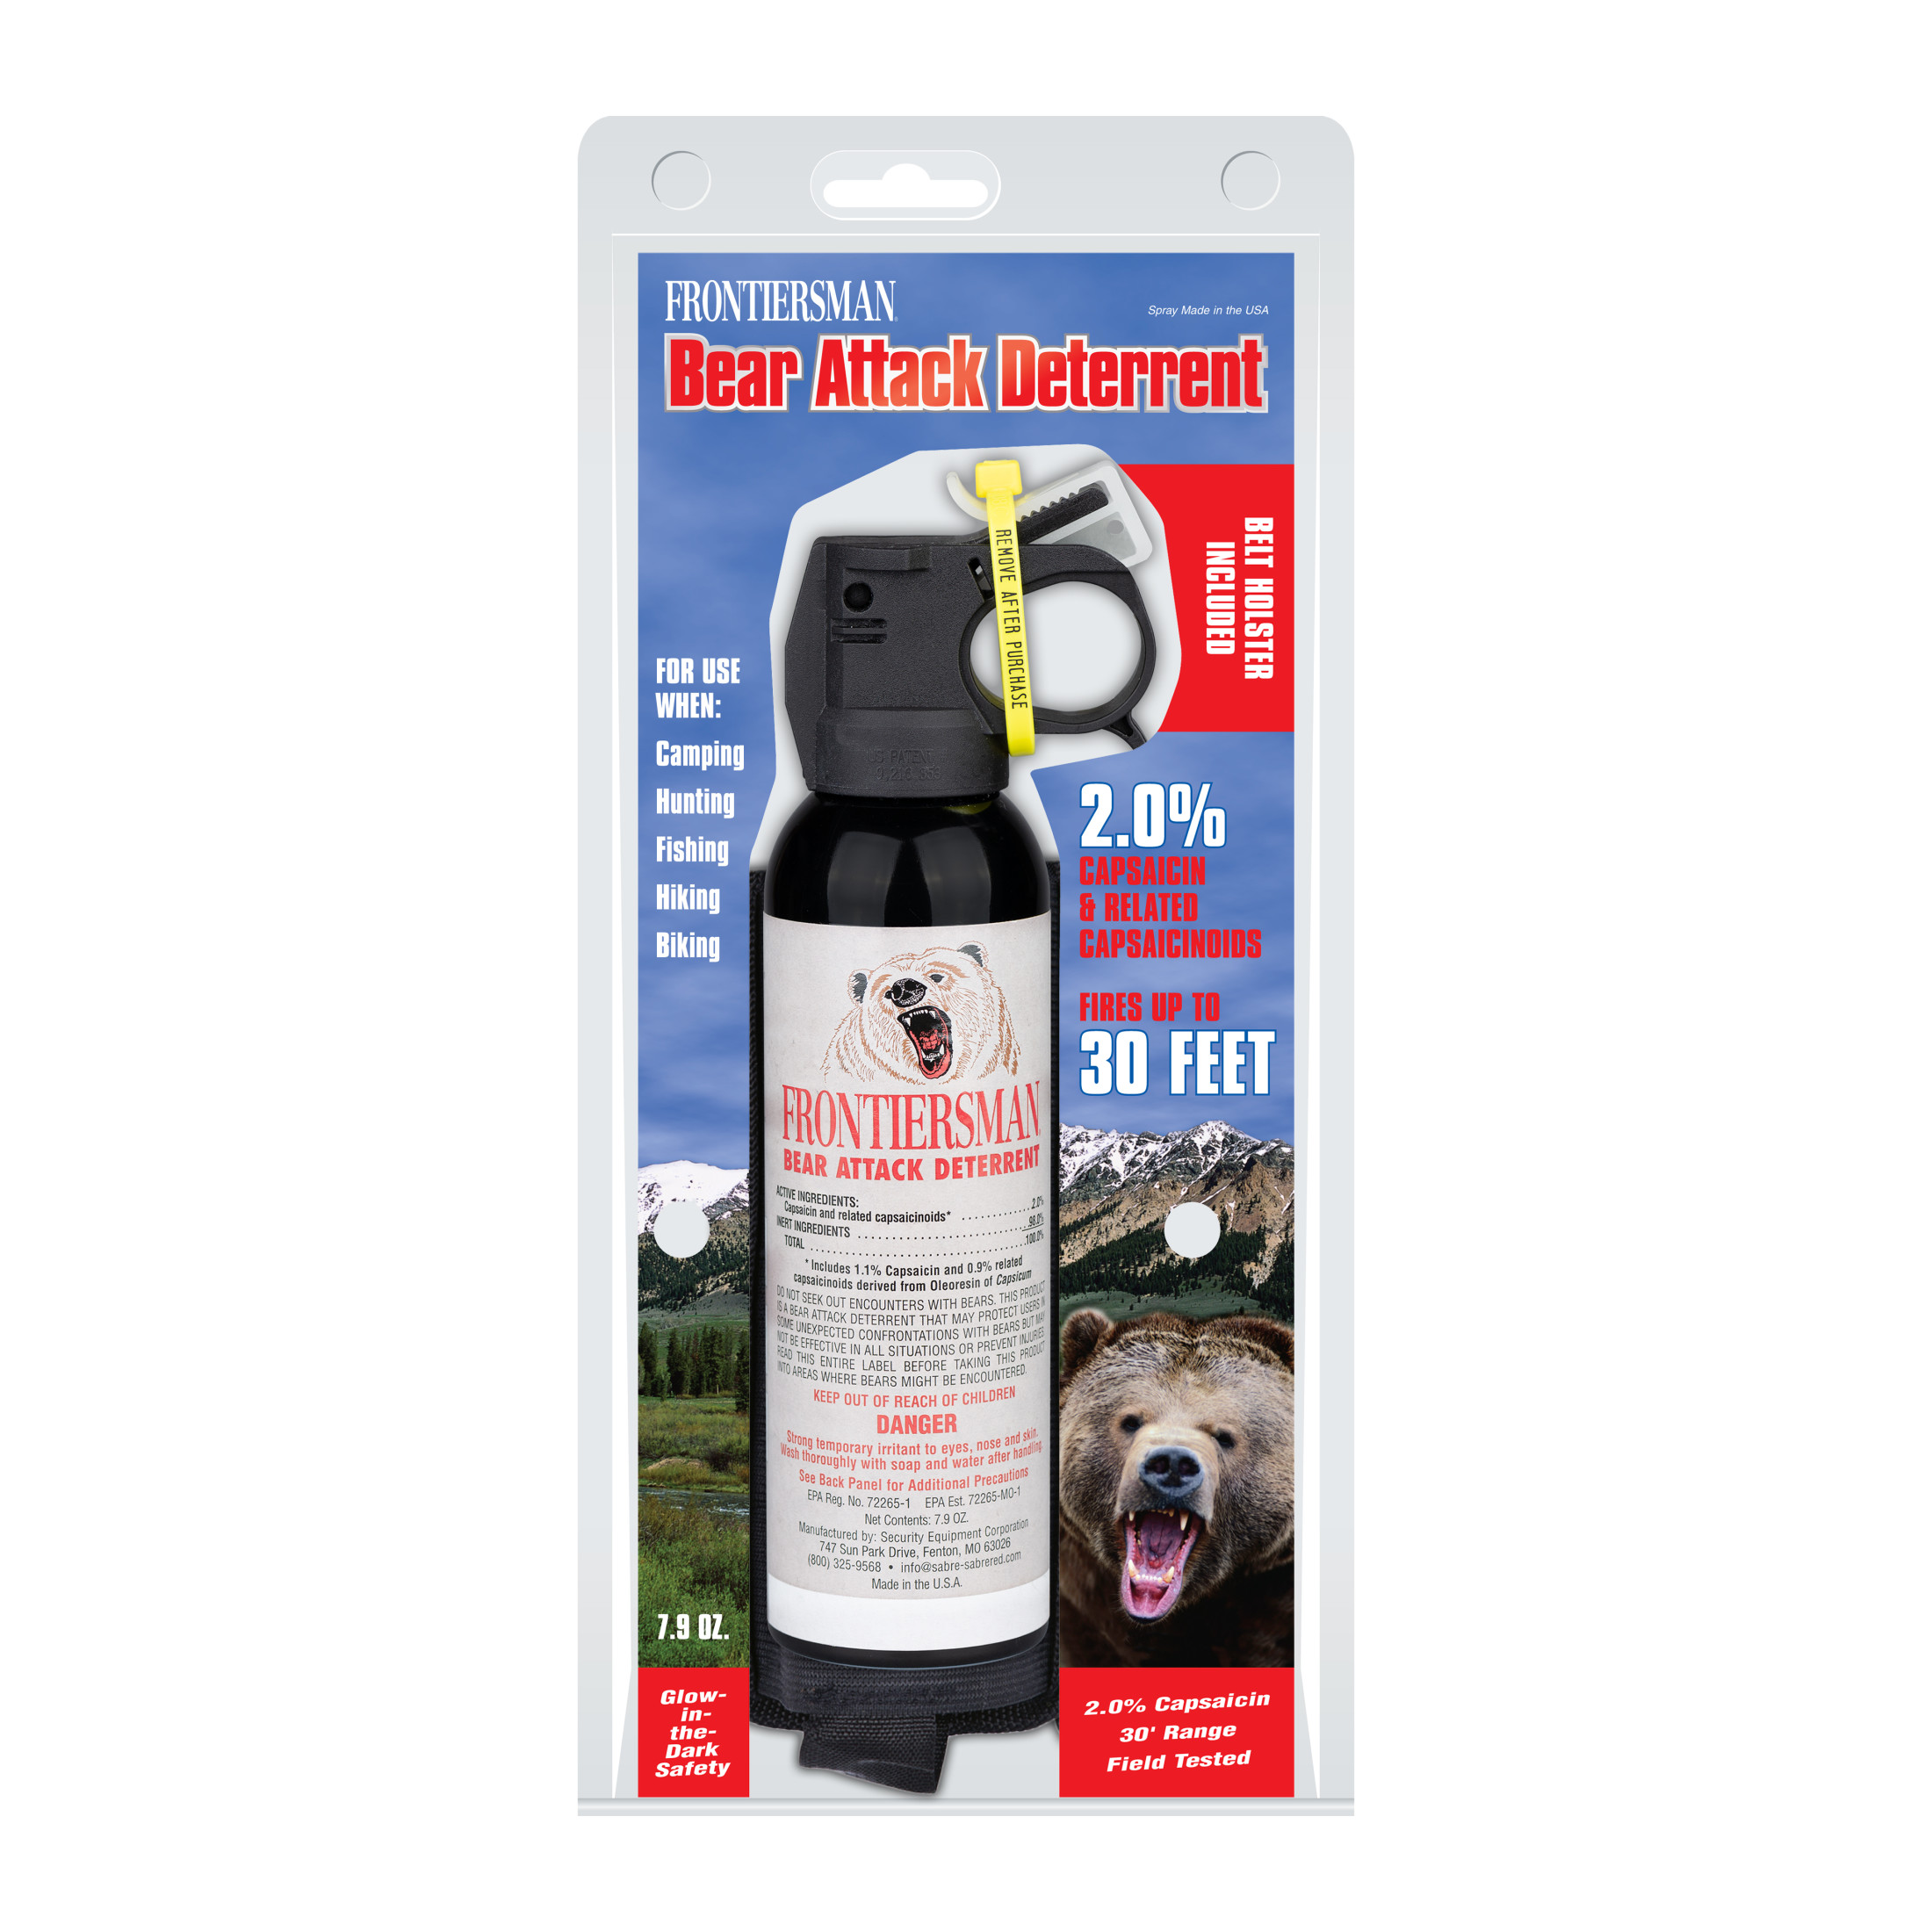 SABRE Frontiersman 7.9 oz. Bear Spray Deterrent with Belt Holster, White, 8.5 in. - image 3 of 12